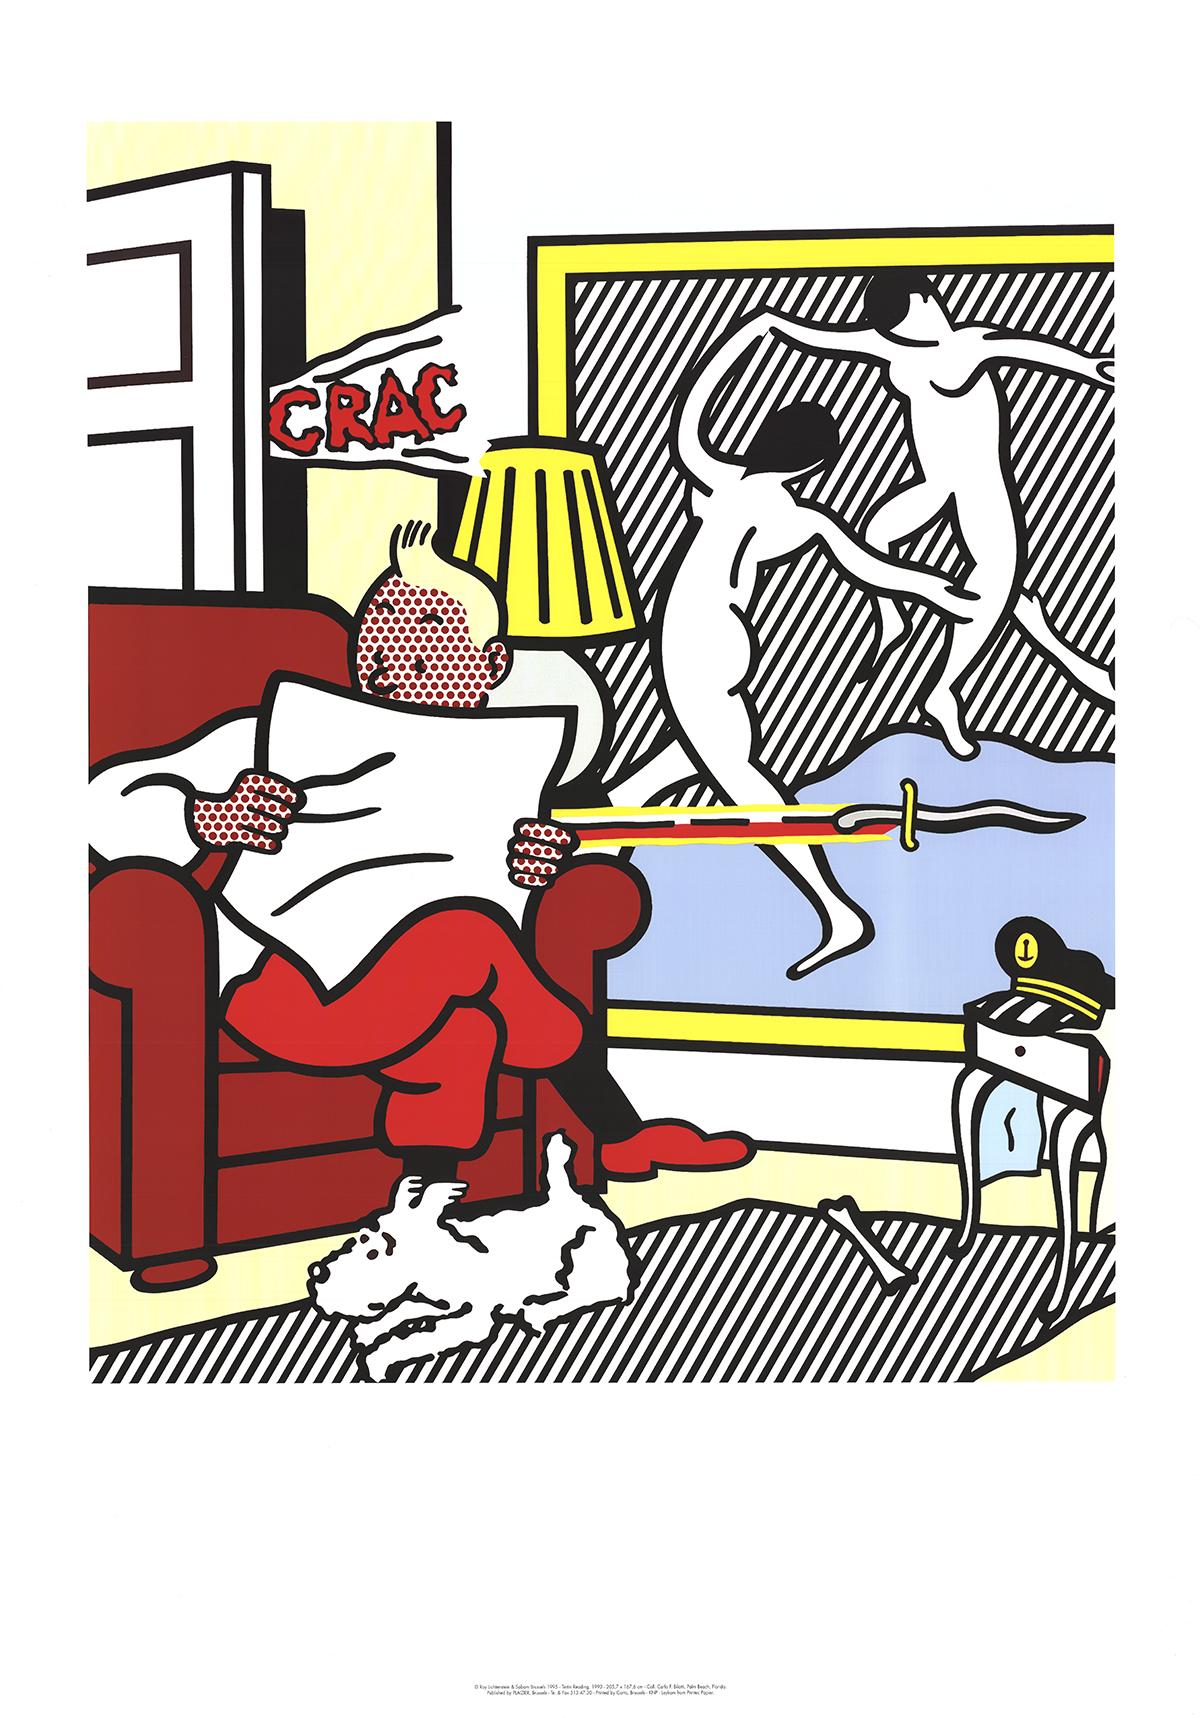 Sku: GH1075
Artist: Roy Lichtenstein
Title: Tintin Reading
Year: 1995
Signed: No
Medium: Offset Lithograph
Paper Size: 39 x 27.5 inches ( 99.06 x 69.85 cm )
Image Size: 29 x 23.25 inches ( 73.66 x 59.055 cm )
Edition Size: Unknown
Framed: